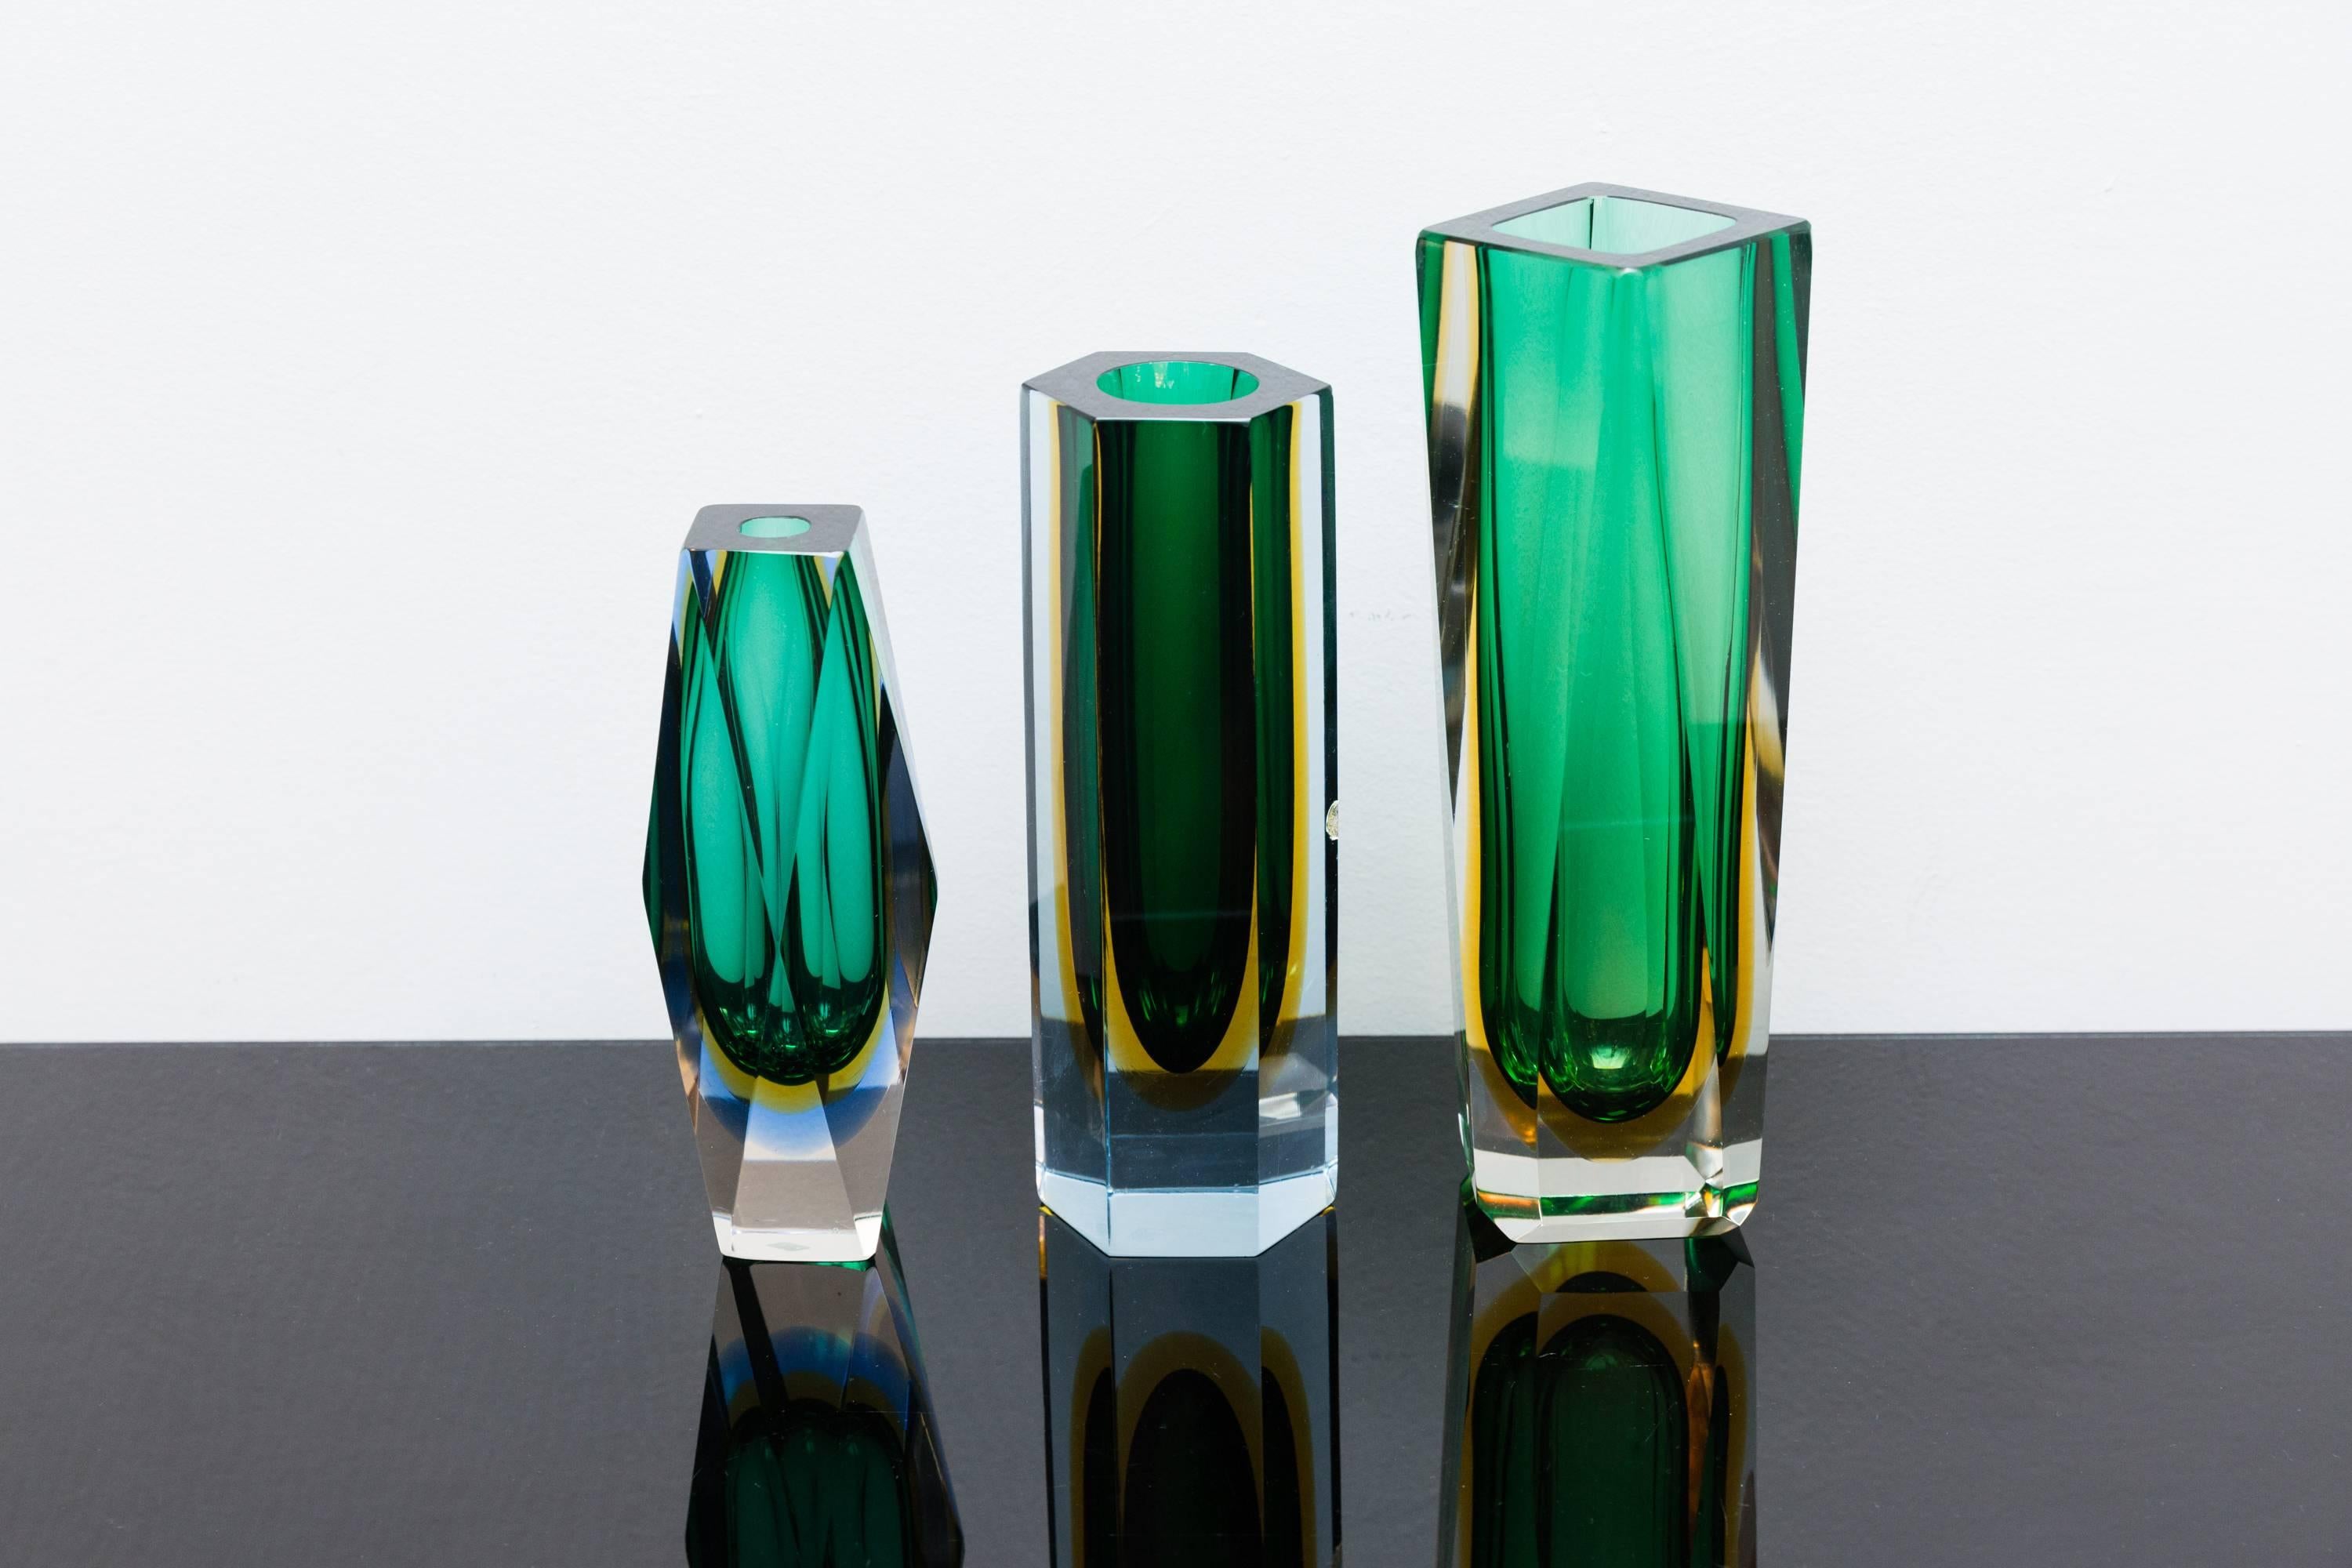 Beautiful multi-color set of three faceted vases, Murano, Italy, circa 1960, Prod. Sommerso, attributed to Alessandro Mandruzzato
Different coolers of green, amber-yellow, turquoise, dark green, light blue, into clear glass.
The vibrant colors and